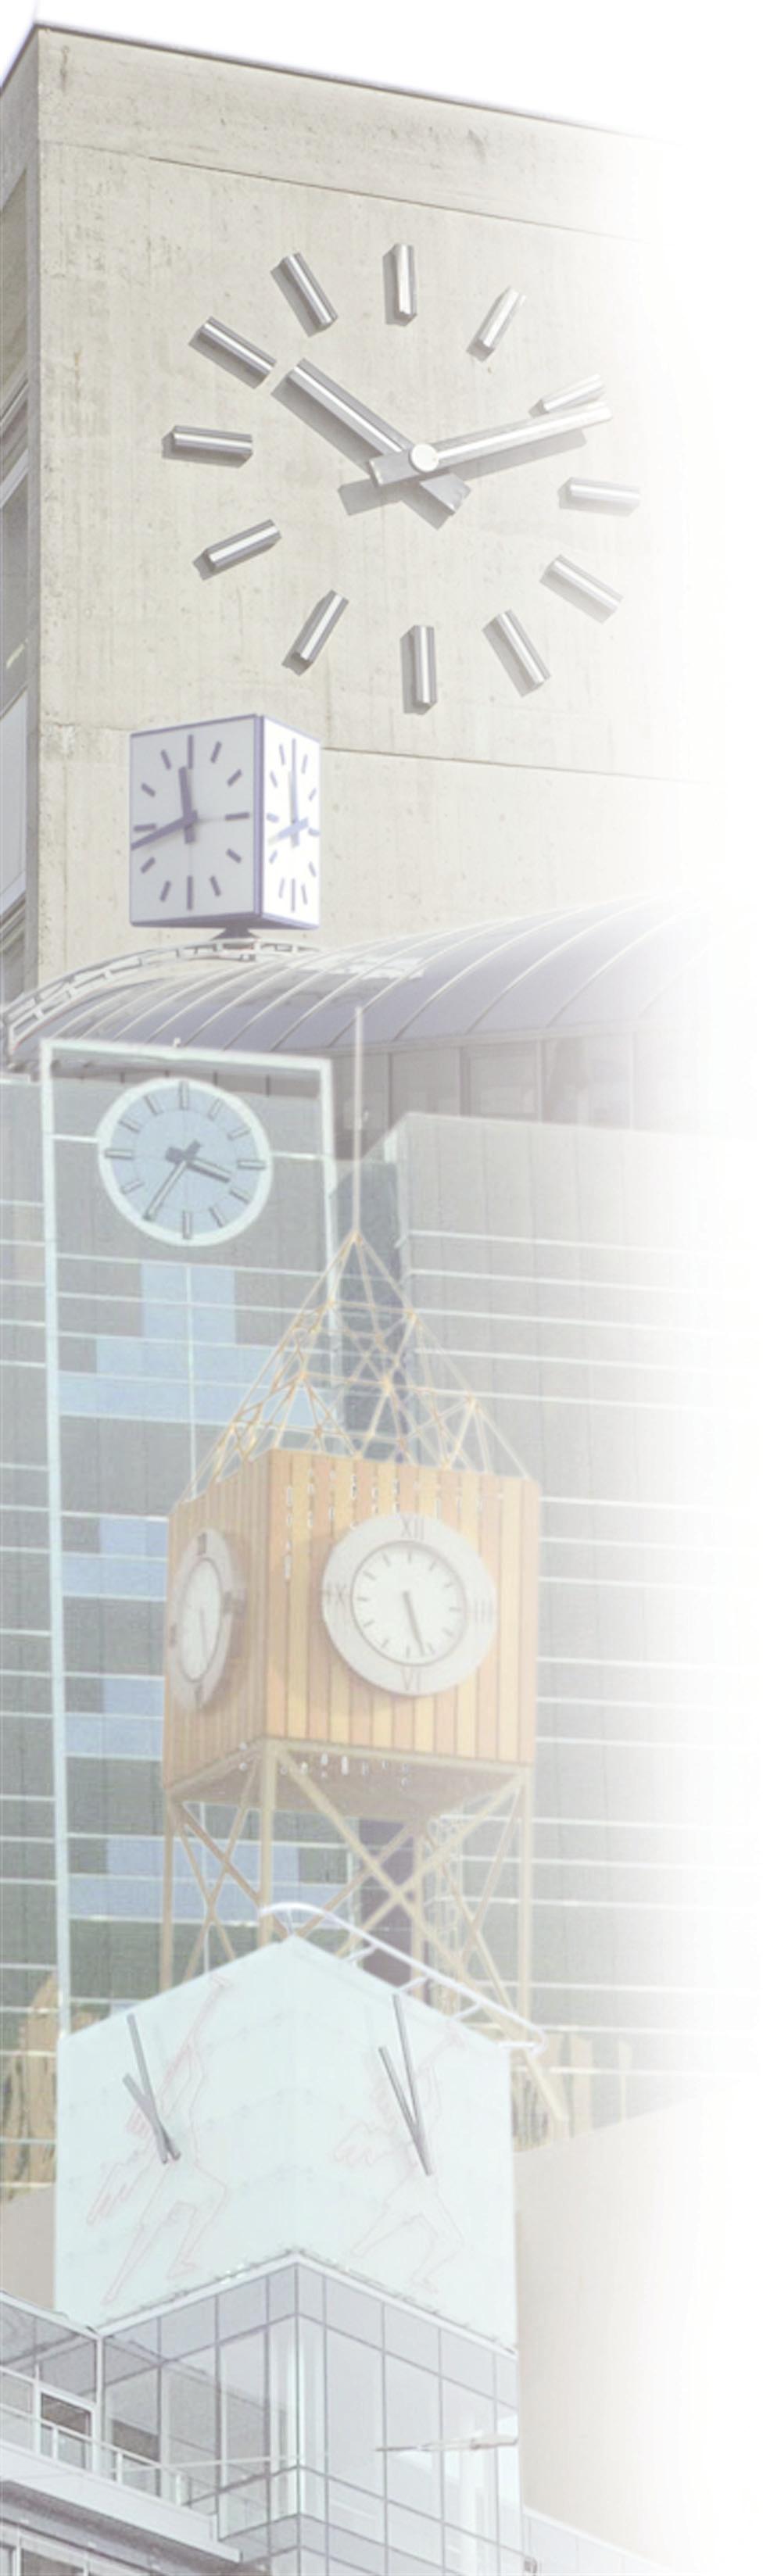 Swiss Time Systems The Clock as an Effective Eye-Catcher in City and Building